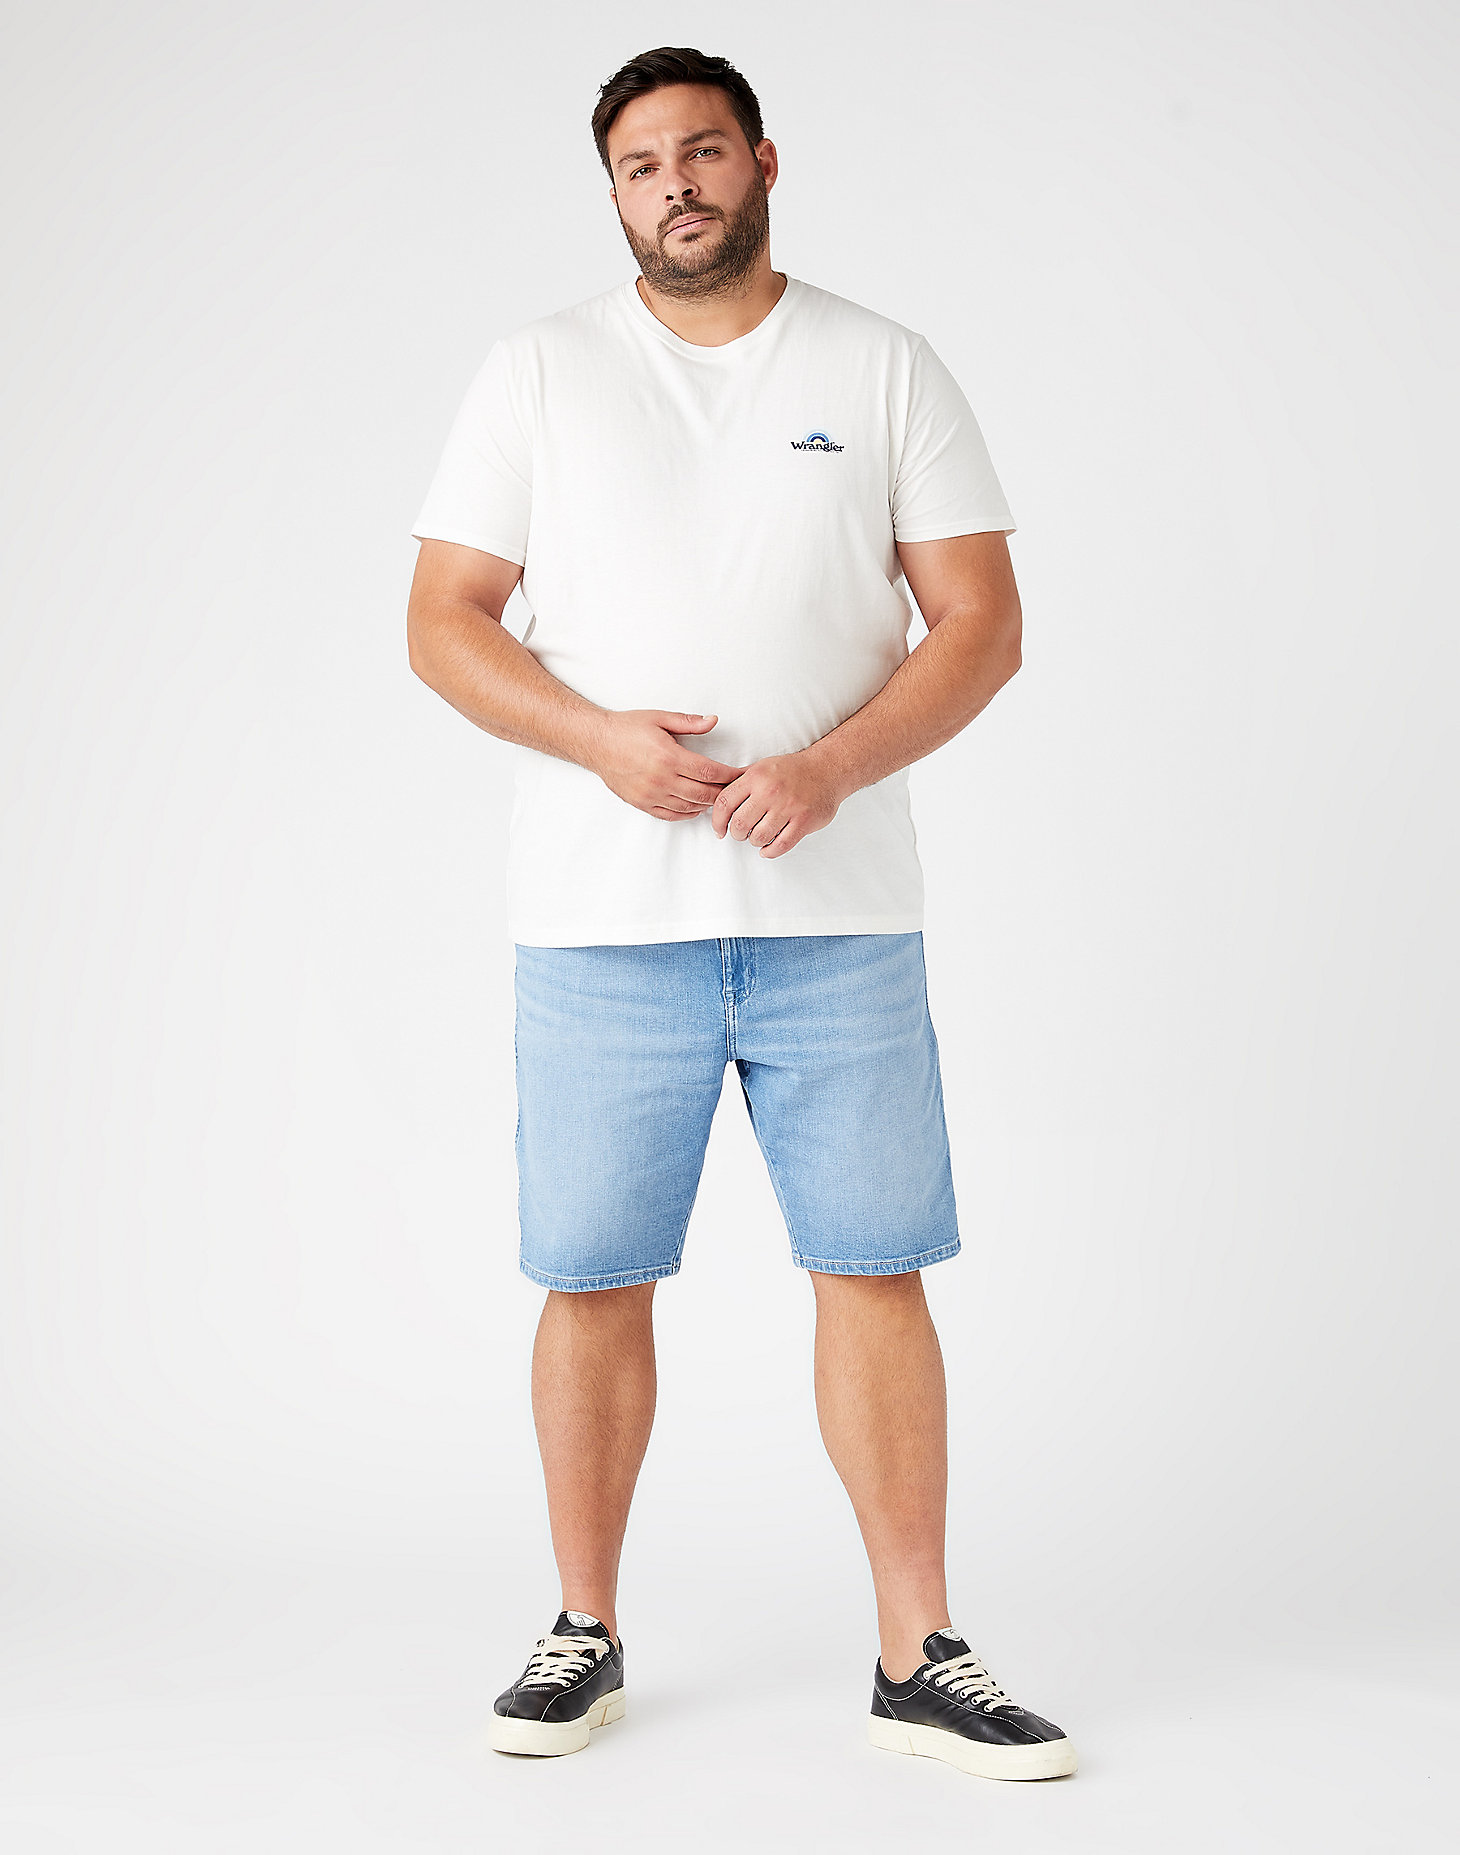 Texas Shorts in Blue Champ alternative view 1